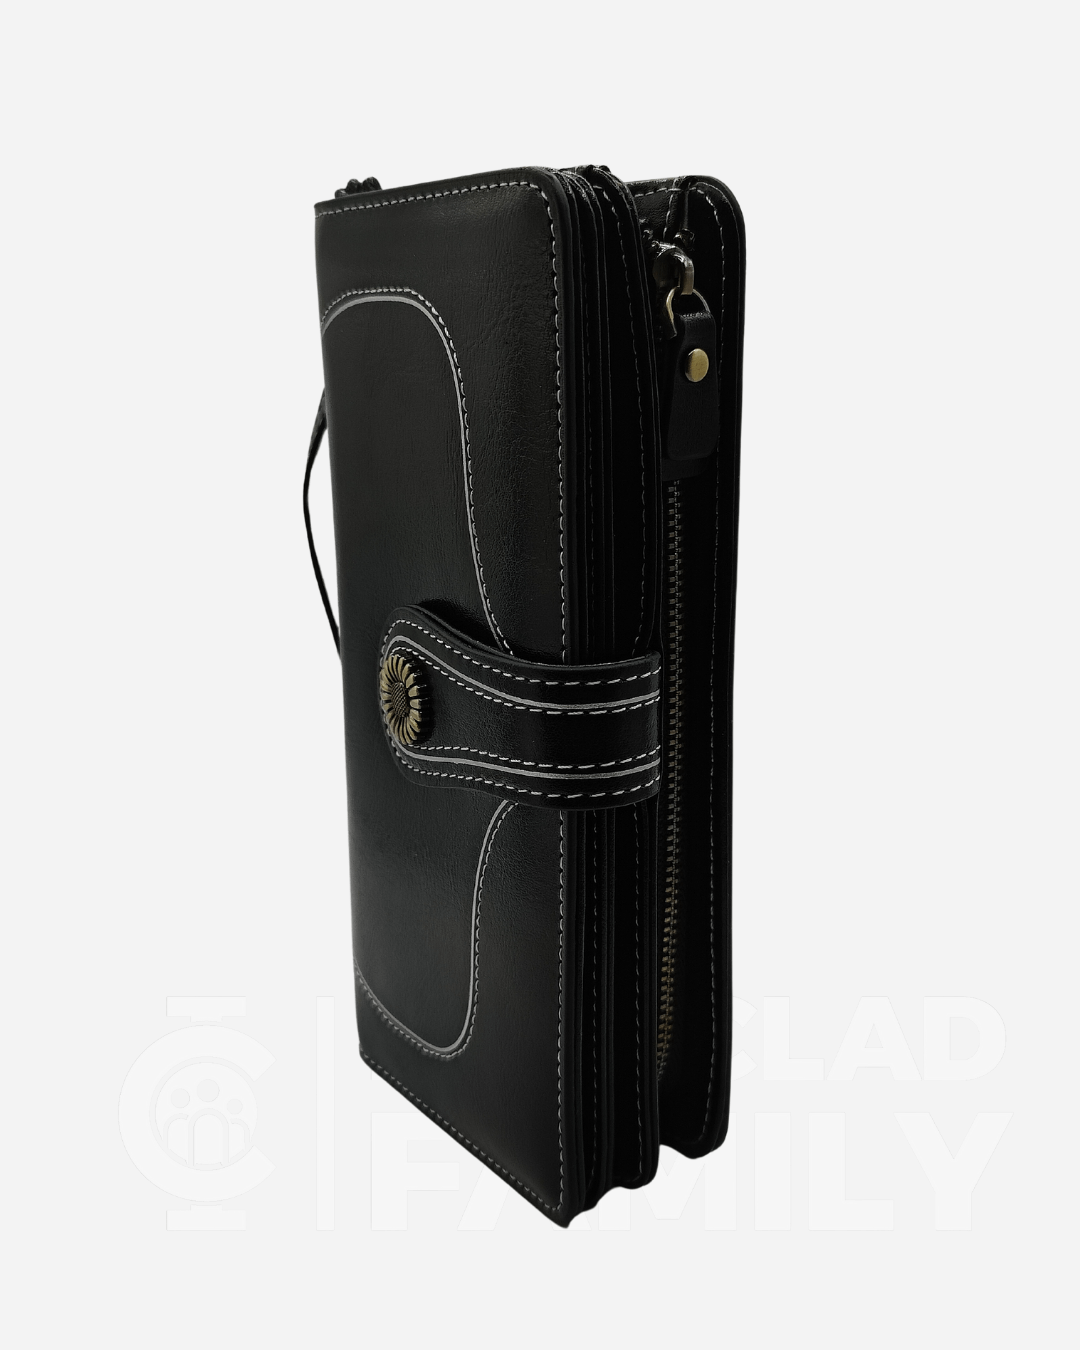 Black RFID Blocking Large Capacity Leather Wallet with a secure zipper